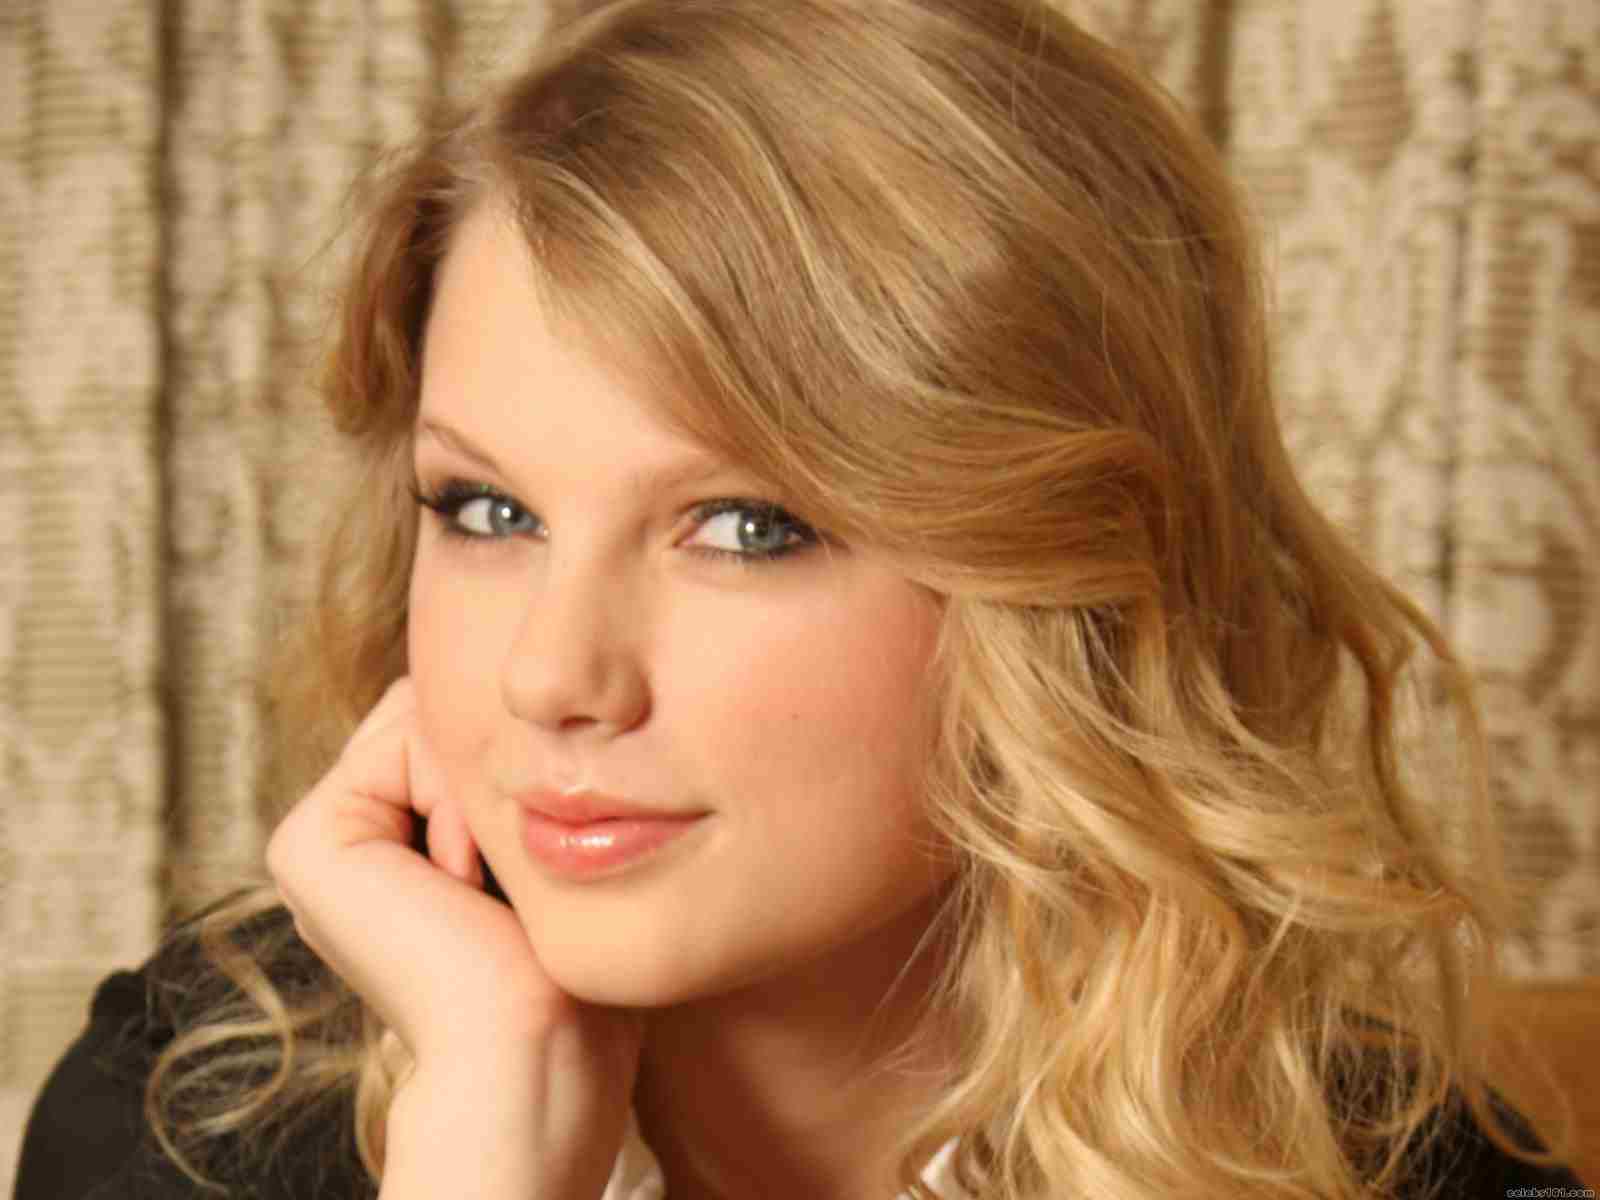 Taylor Swift Biography Age, DOB, Height, Family, Career, Awards